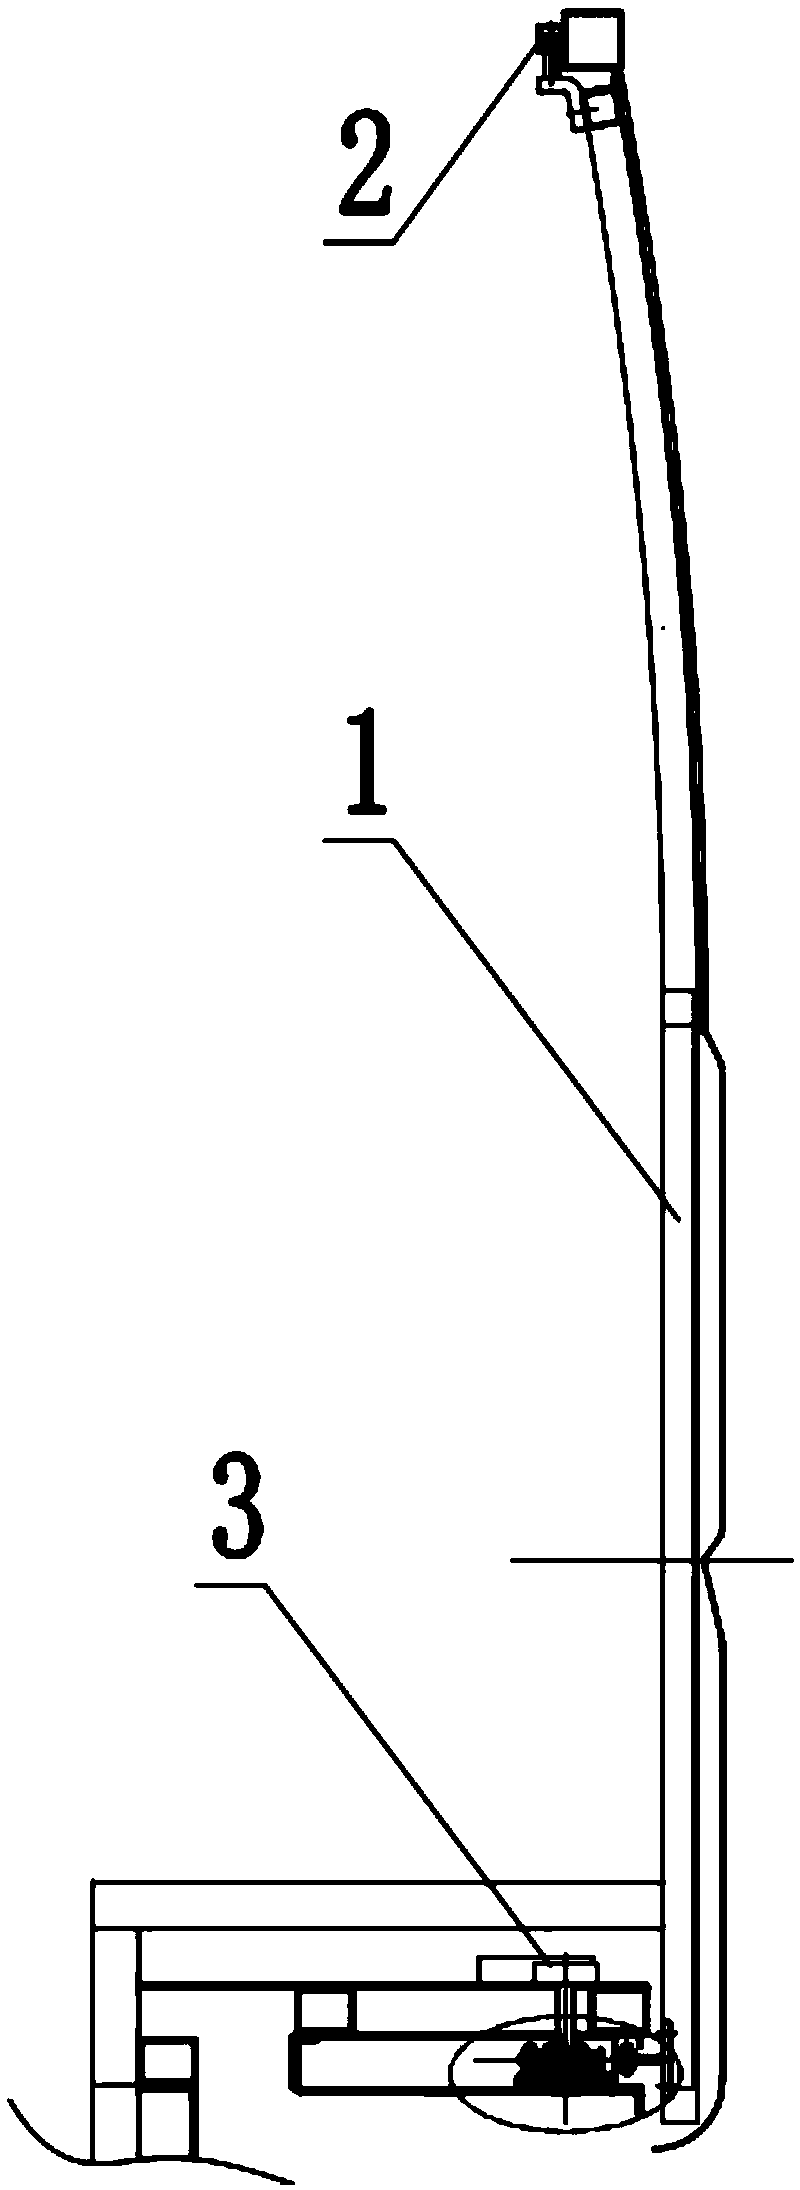 Electric control method for automatic outward sliding door system of vehicle